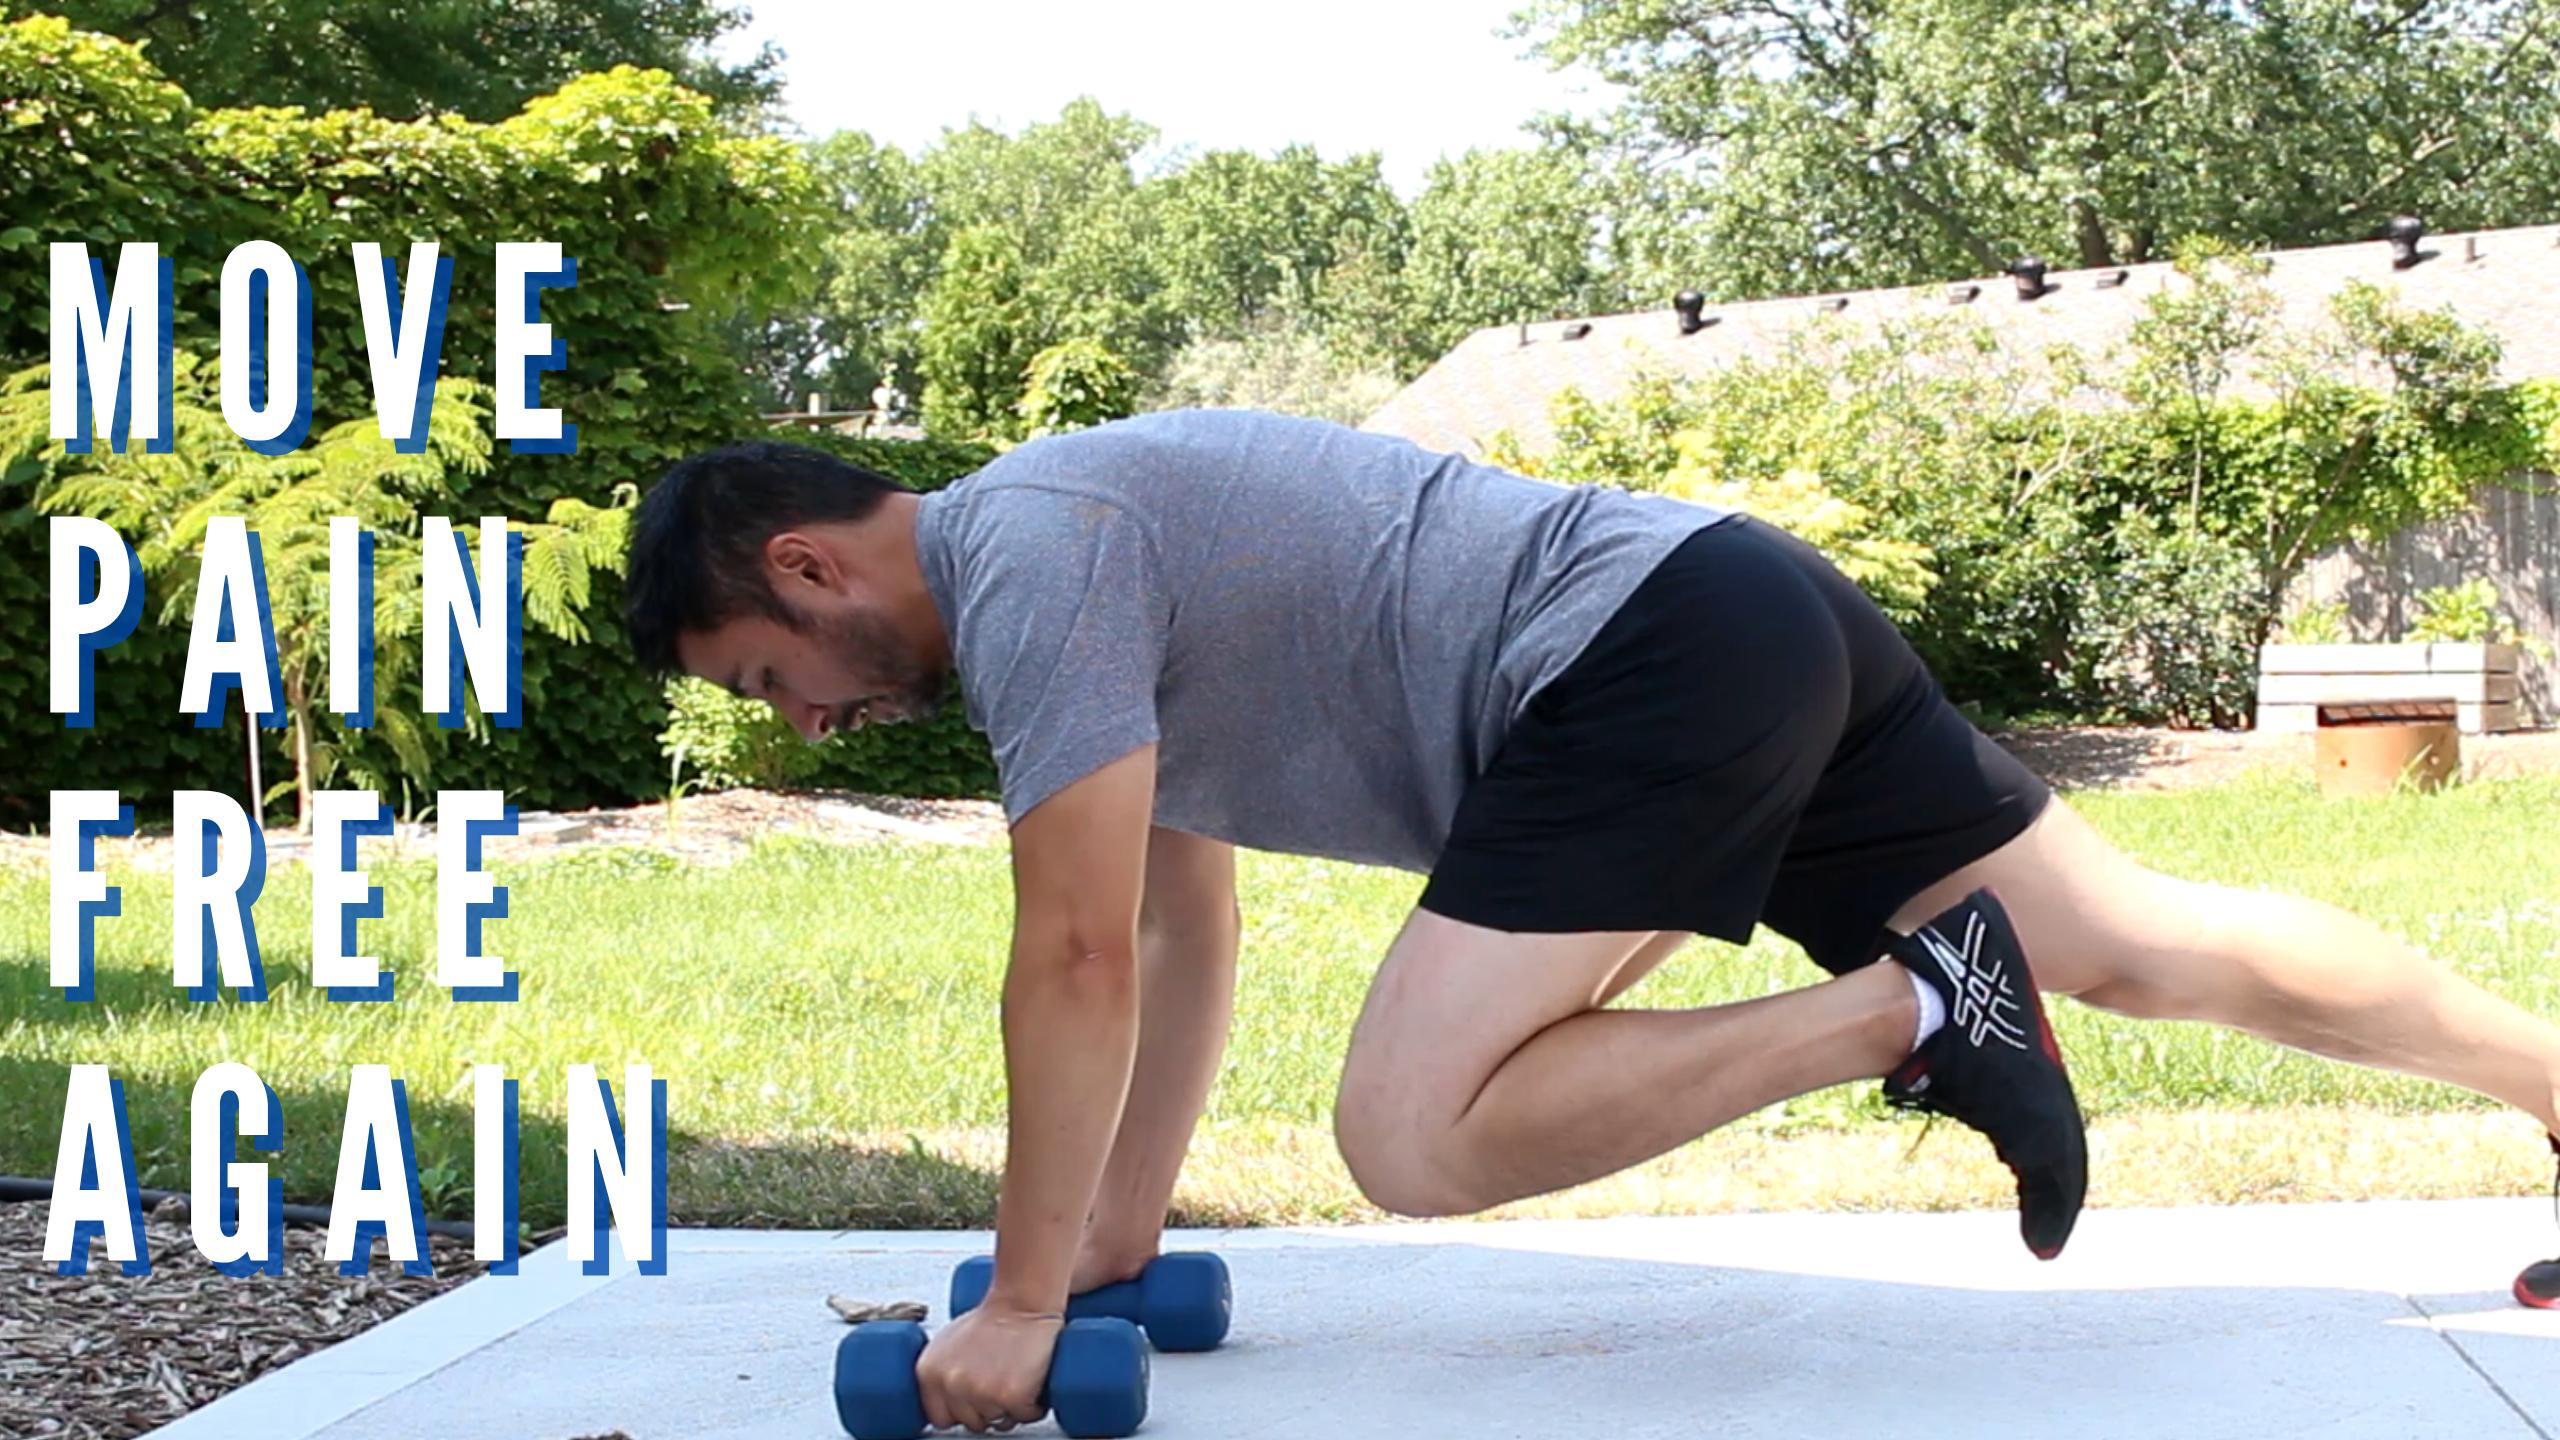 Helping you move pain free with simple mobility exercises